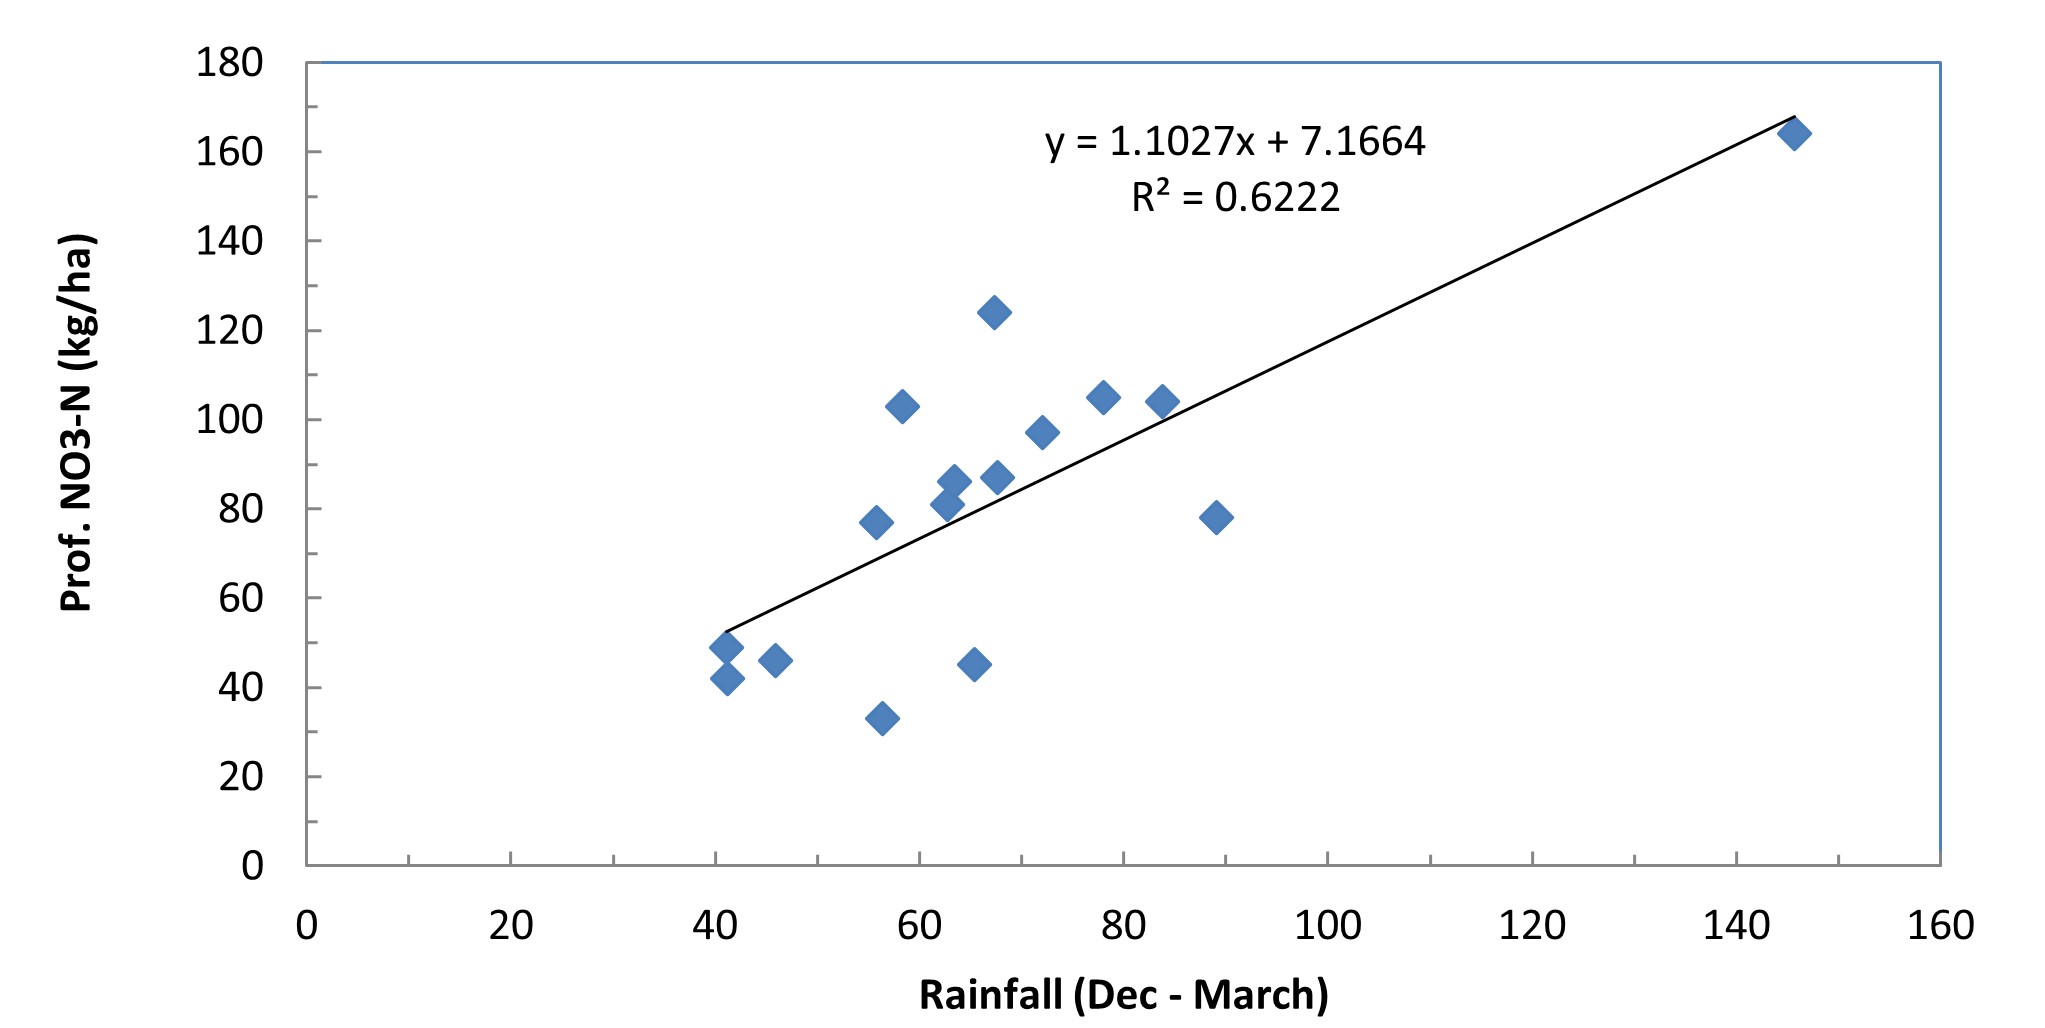 Relationship between rainfall measured during December through to March and the amount of nitrate in the soil profile from 0 to 120 centimetres prior to sowing at Horsham for the period between 2001 to 2017.